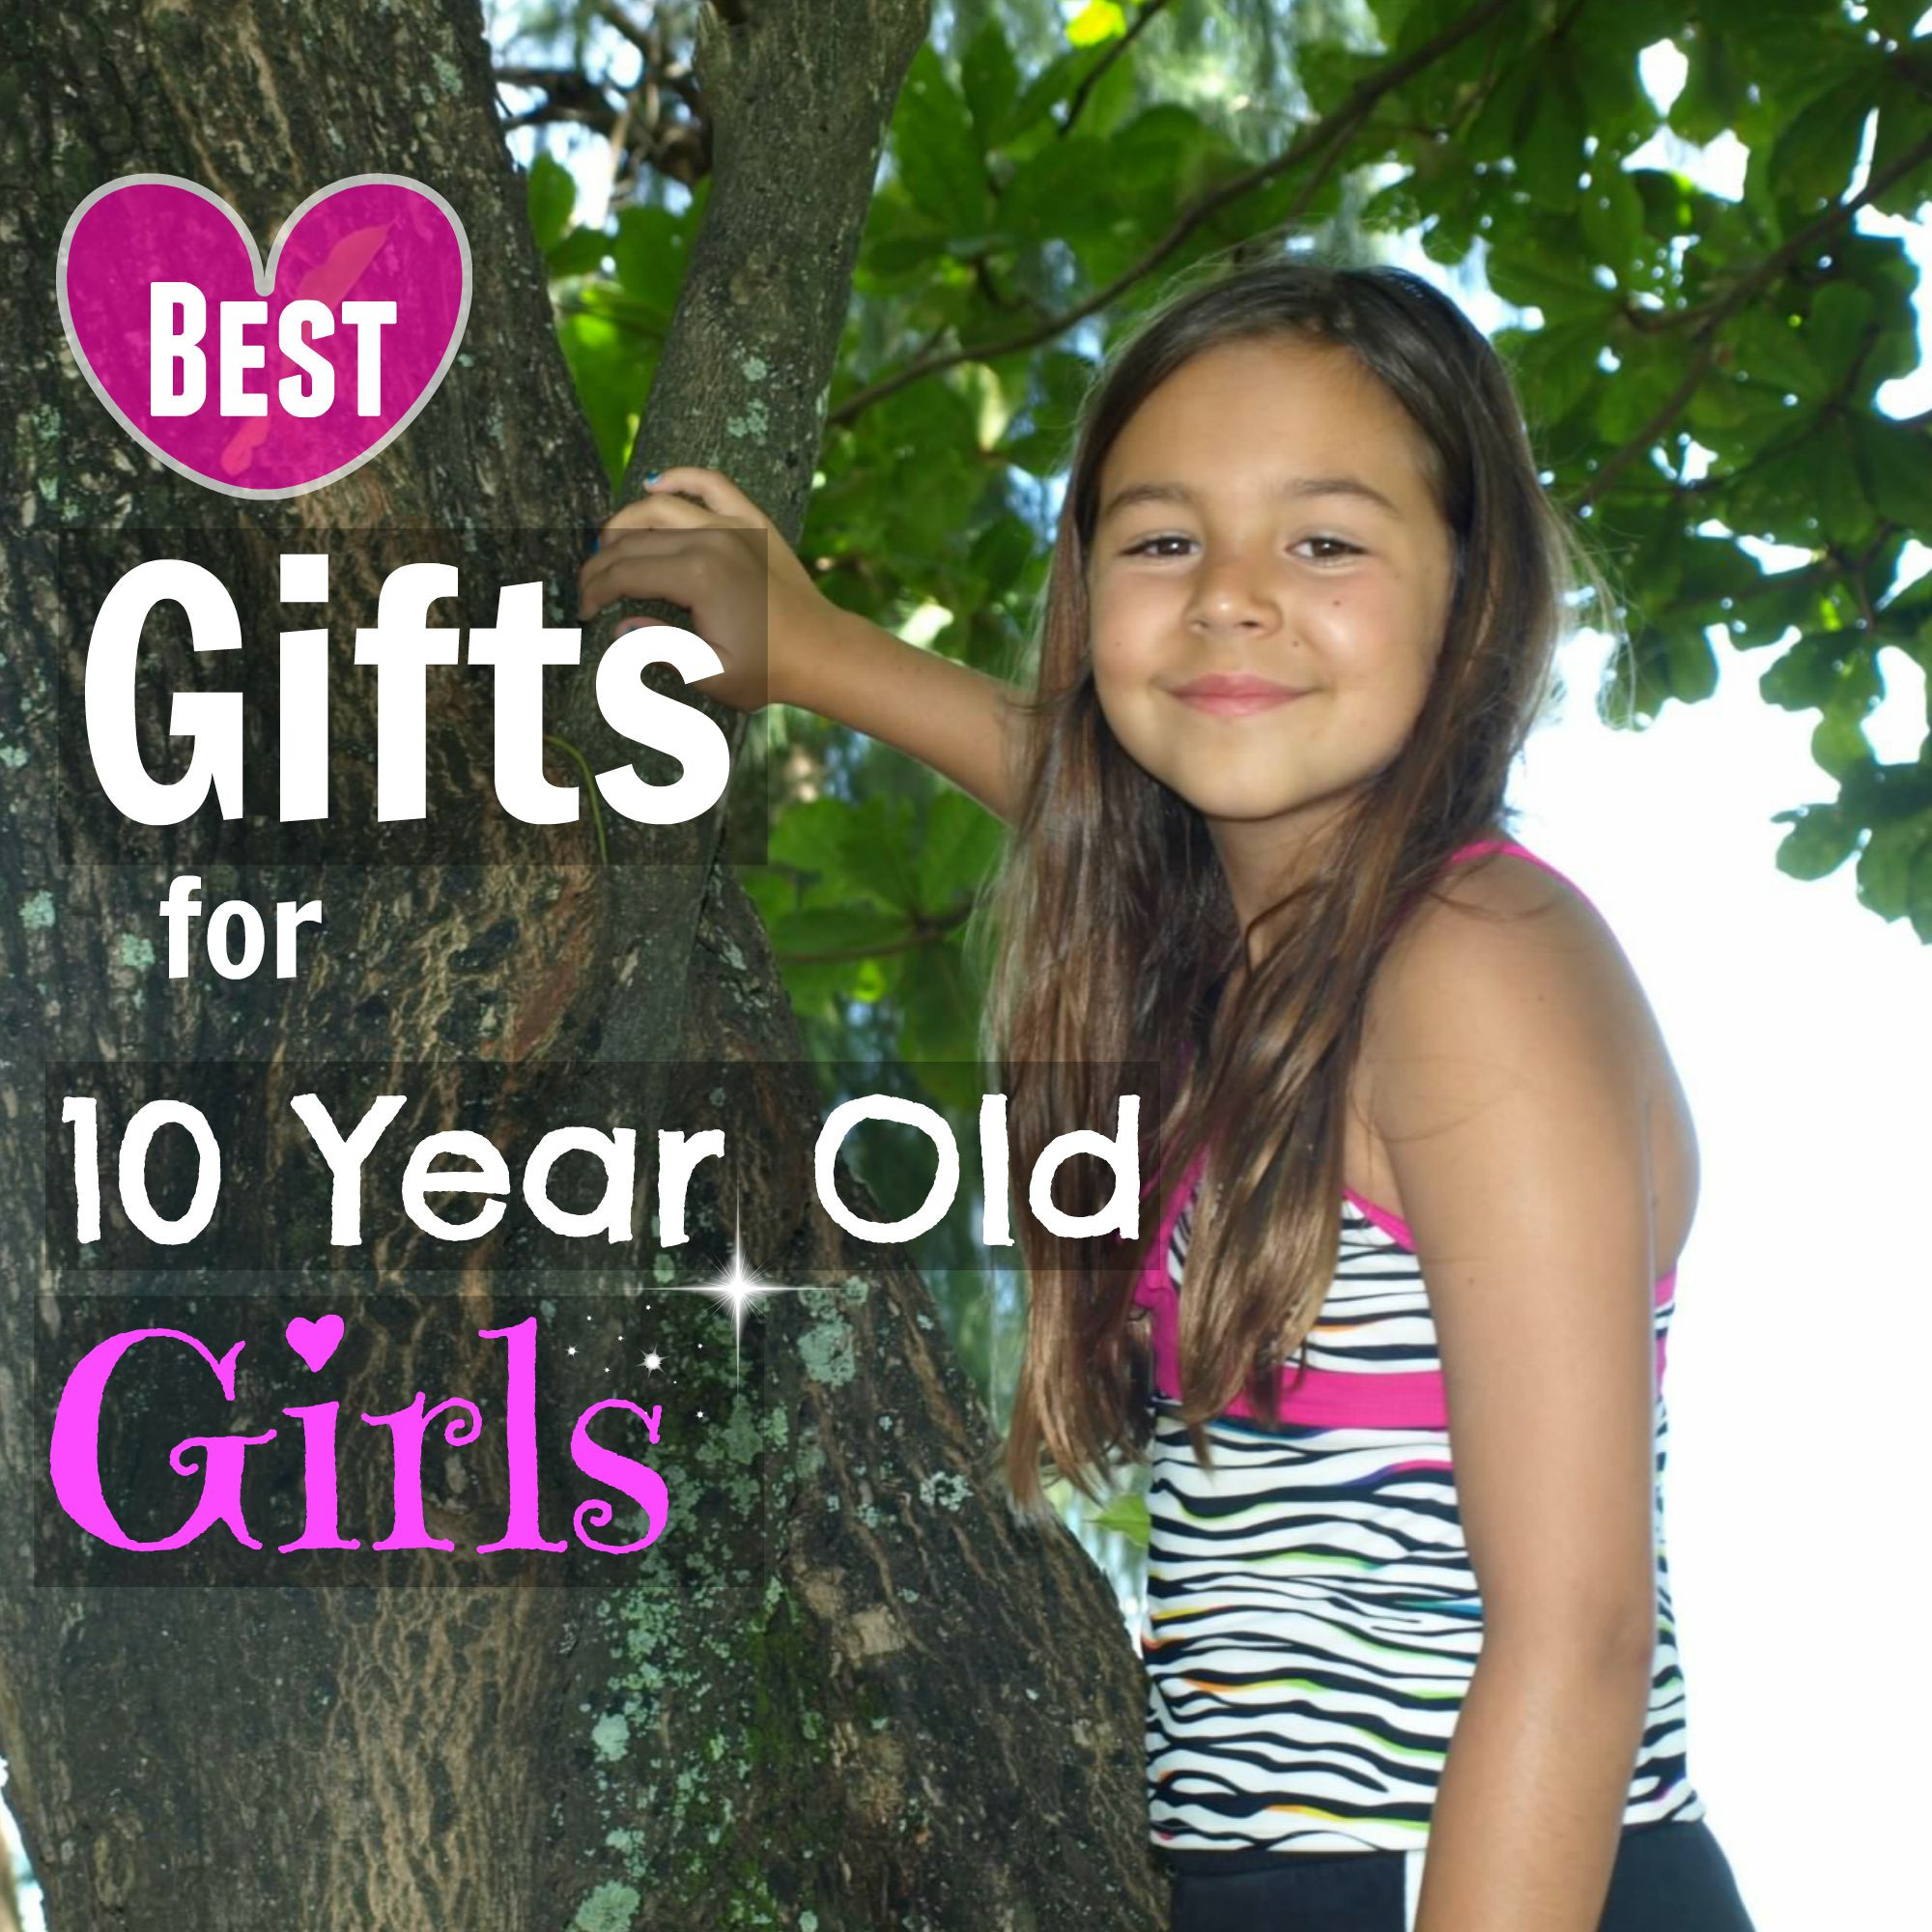 Gift Ideas 10 Year Old Girls
 25 Best Gifts for 10 Year Old Girls You Wouldn t Have